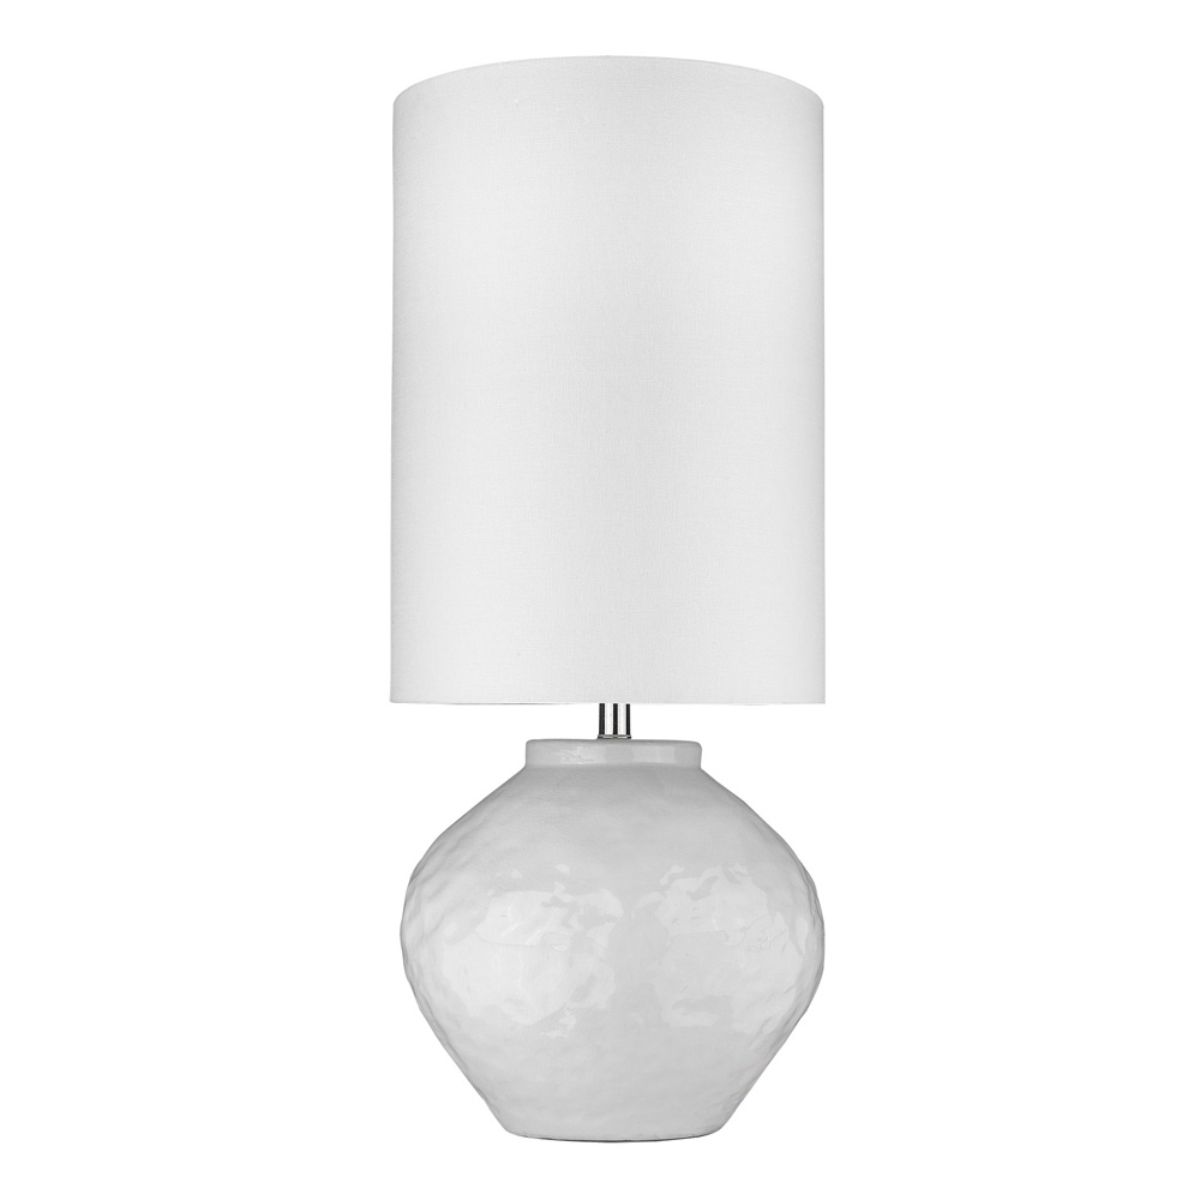 Trend Home 1 Light 40 inches Table Lamp White Hammered Ceramic Body and Polished Nickel Accents